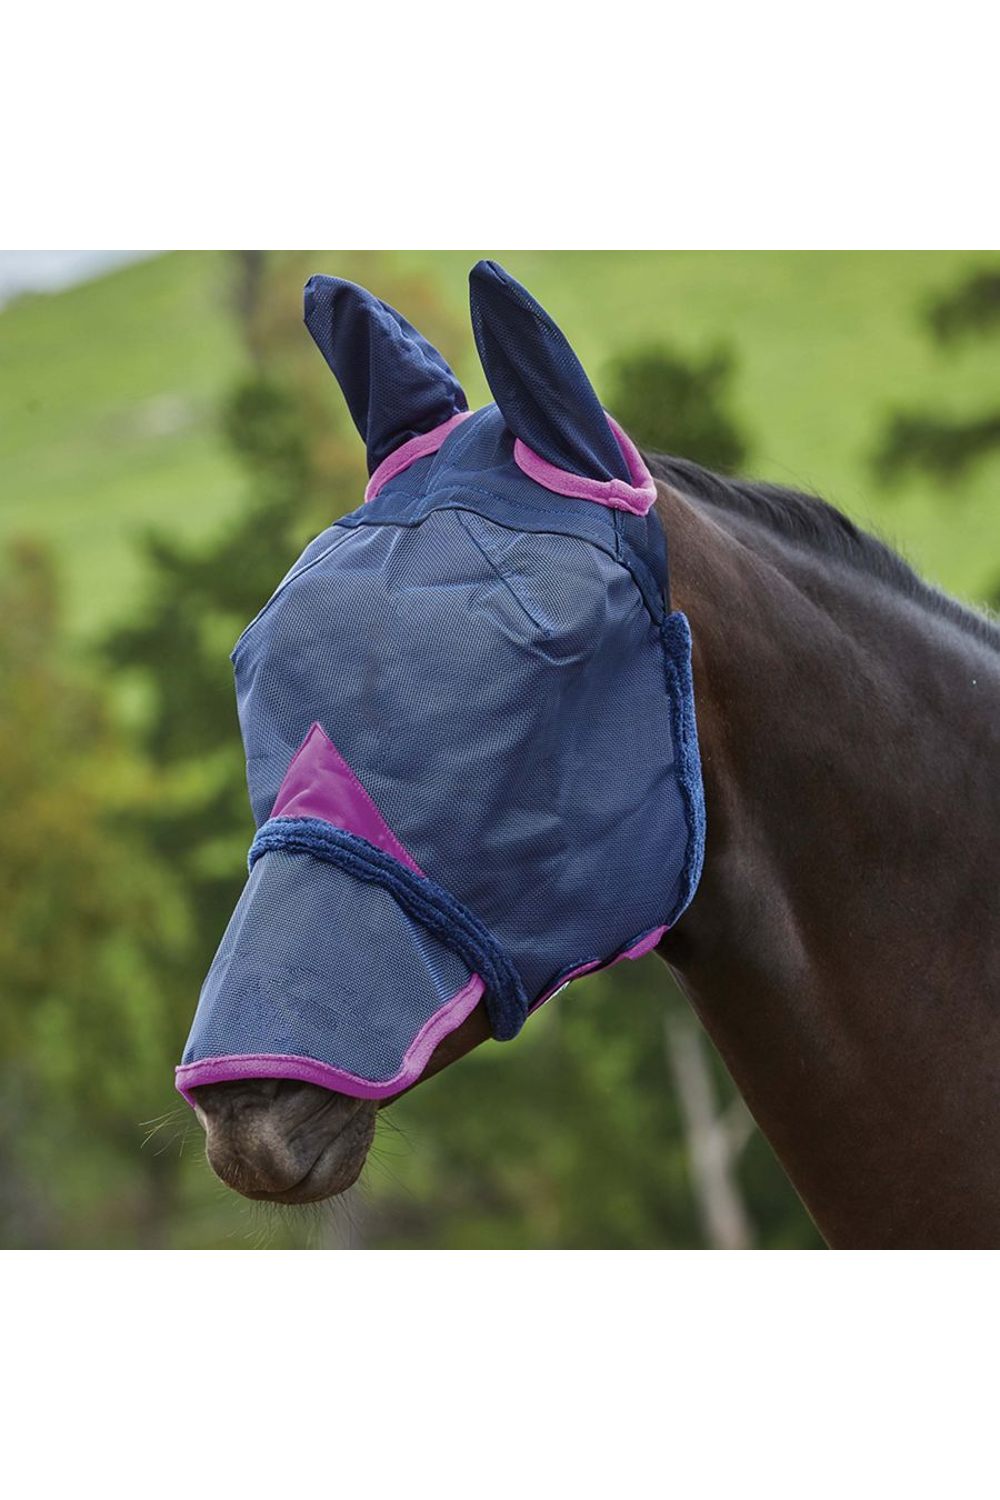 WeatherBeeta Comfitec Durable Mesh Mask With Ears &amp; Nose in Navy/Purple